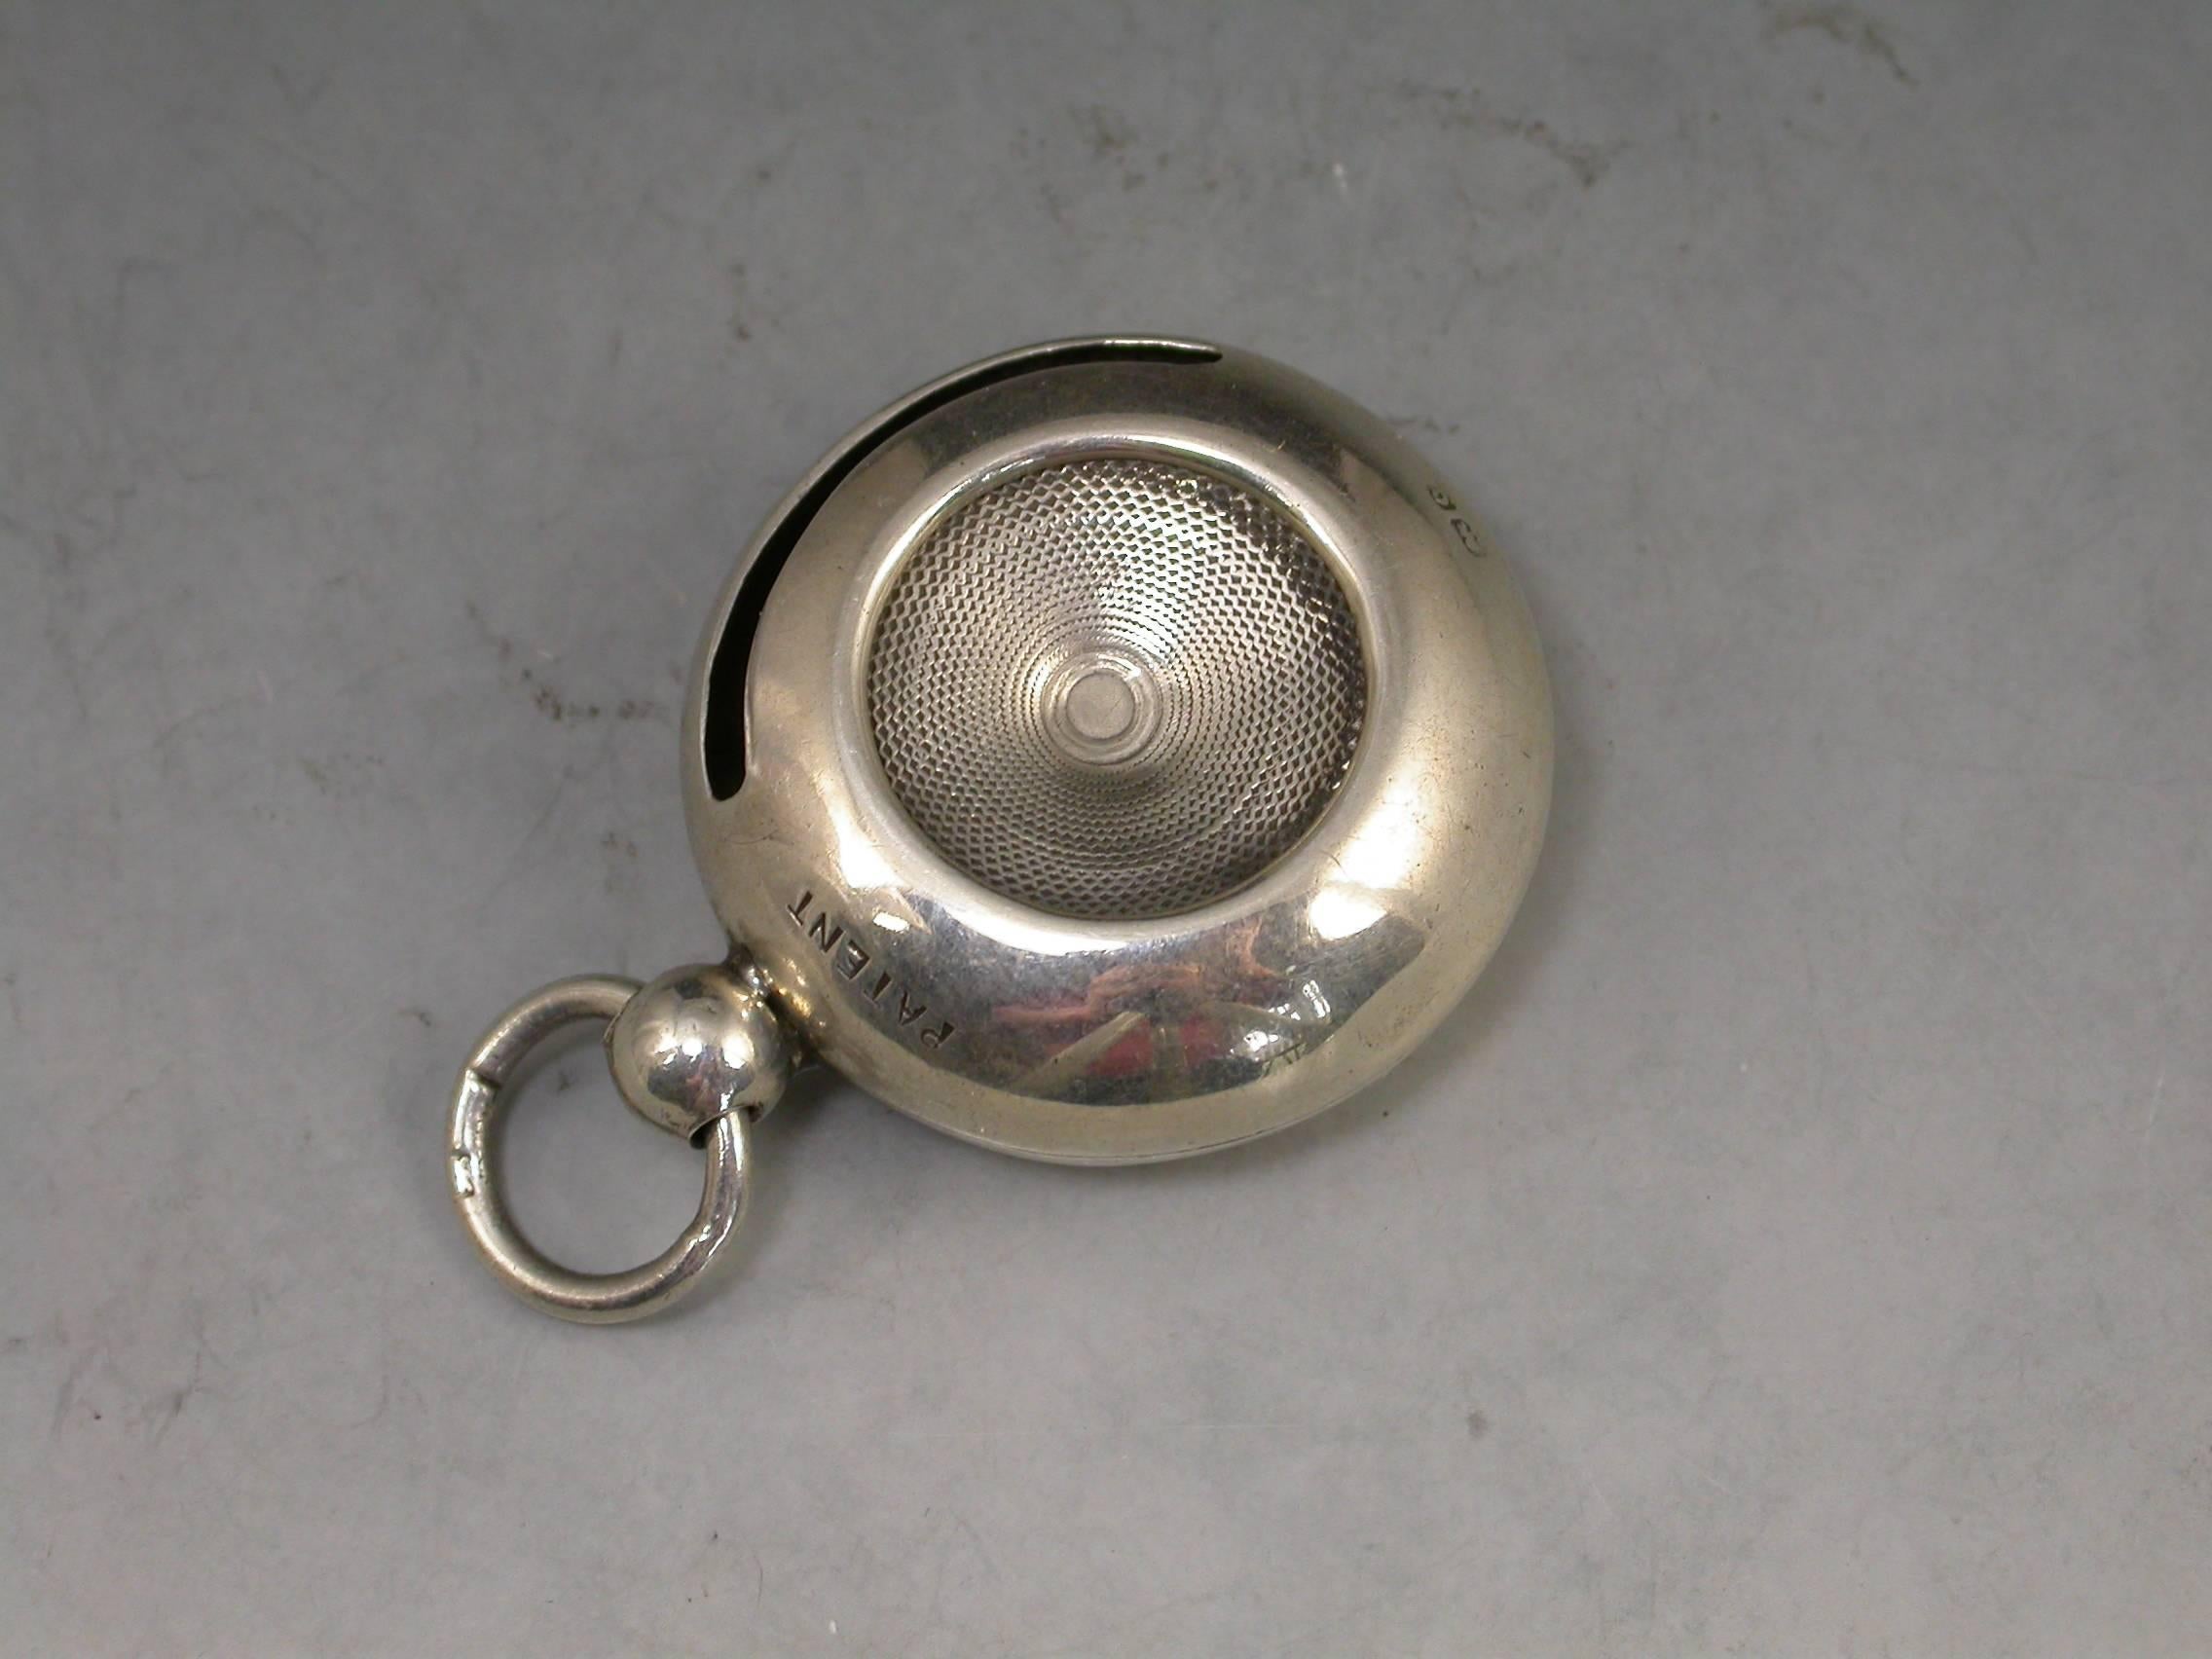 An unusual Edwardian silver Sovereign case of compressed circular form with attached suspension ring, an open sprung central sovereign compartment with side loading slot. A patented design.

By I J Evans & Co, Birmingham, 1902

In good condition